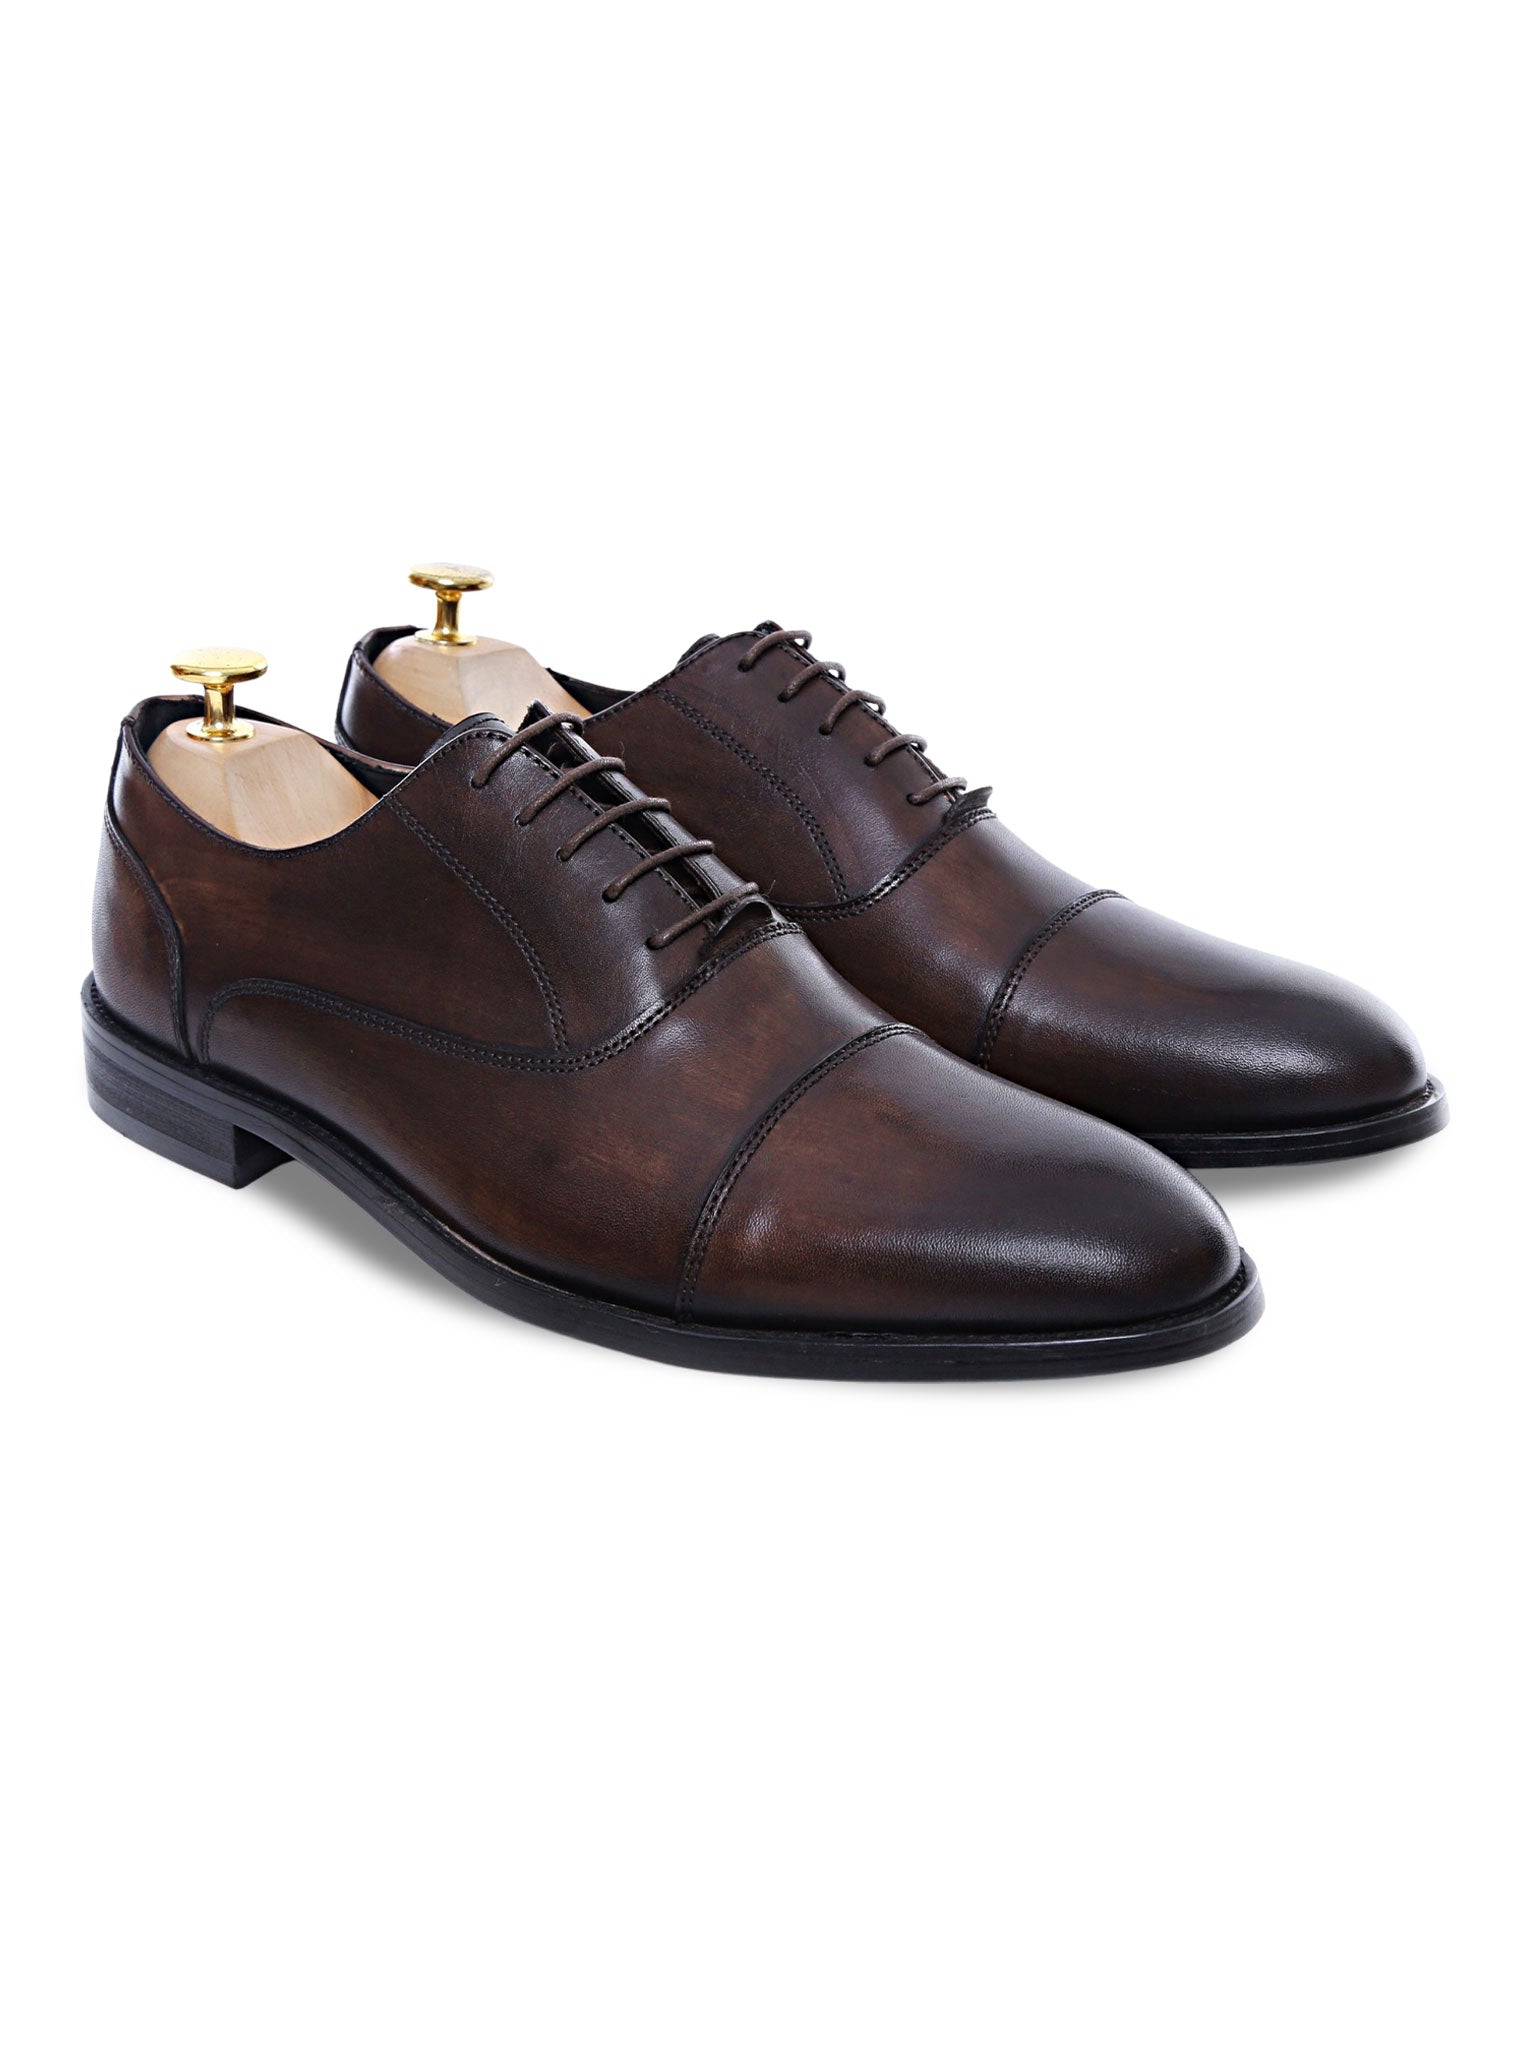 Oxford Cap Toe - Dark Brown Lace Up (Hand Painted Patina) - Zeve Shoes